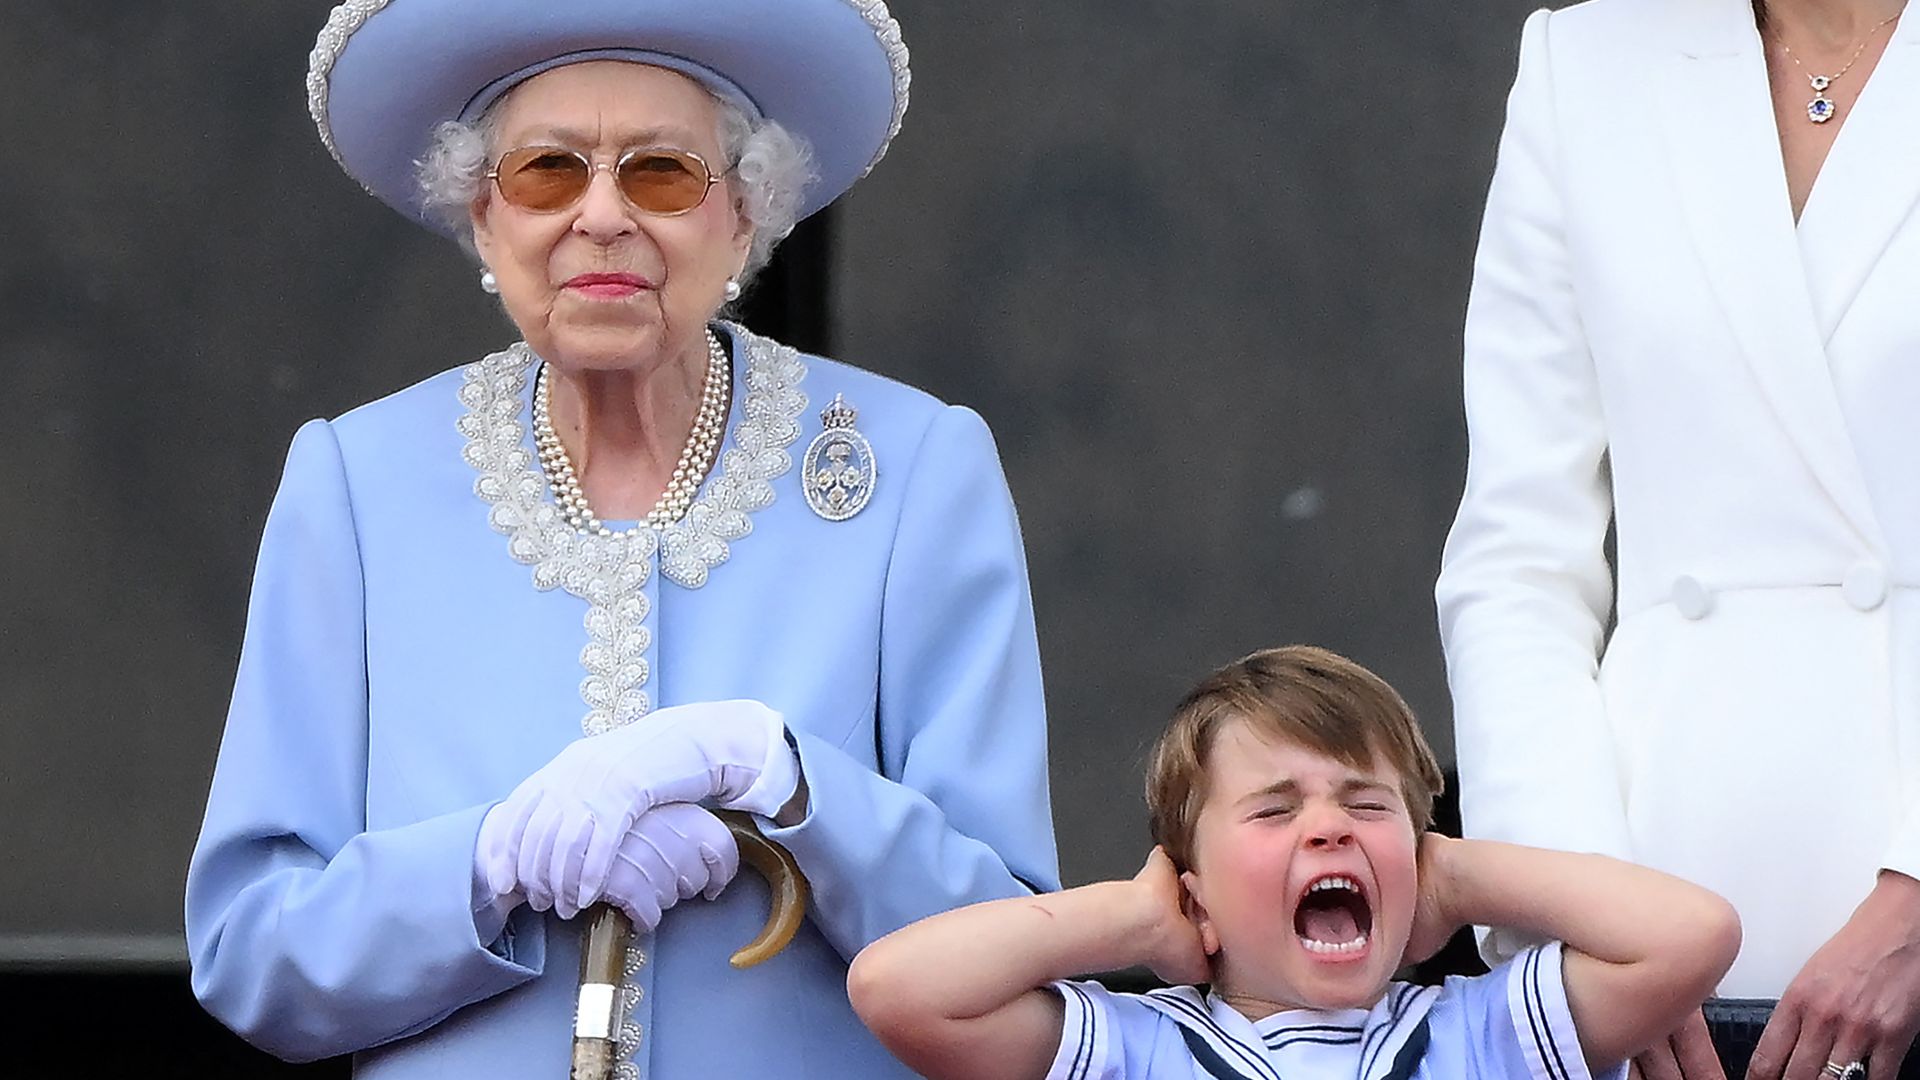 Prince Louis shouting and covering his ears while standing next to the Queen